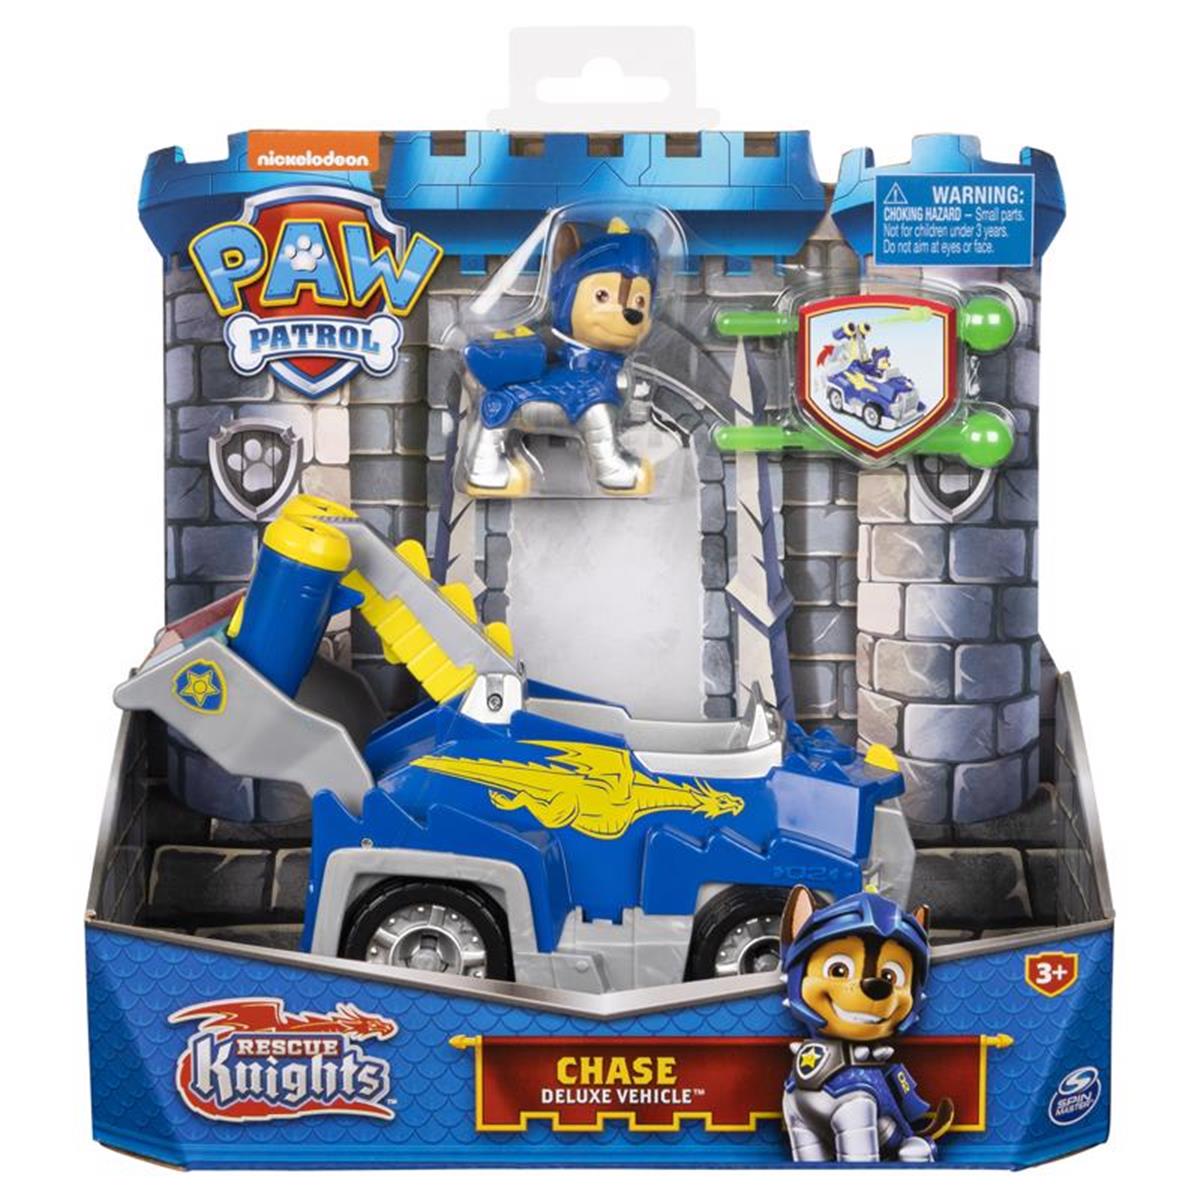 Paw Patrol 9084275 Spin Master Chase Transforming Toy Car&#44; Multi Color - 4 Piece